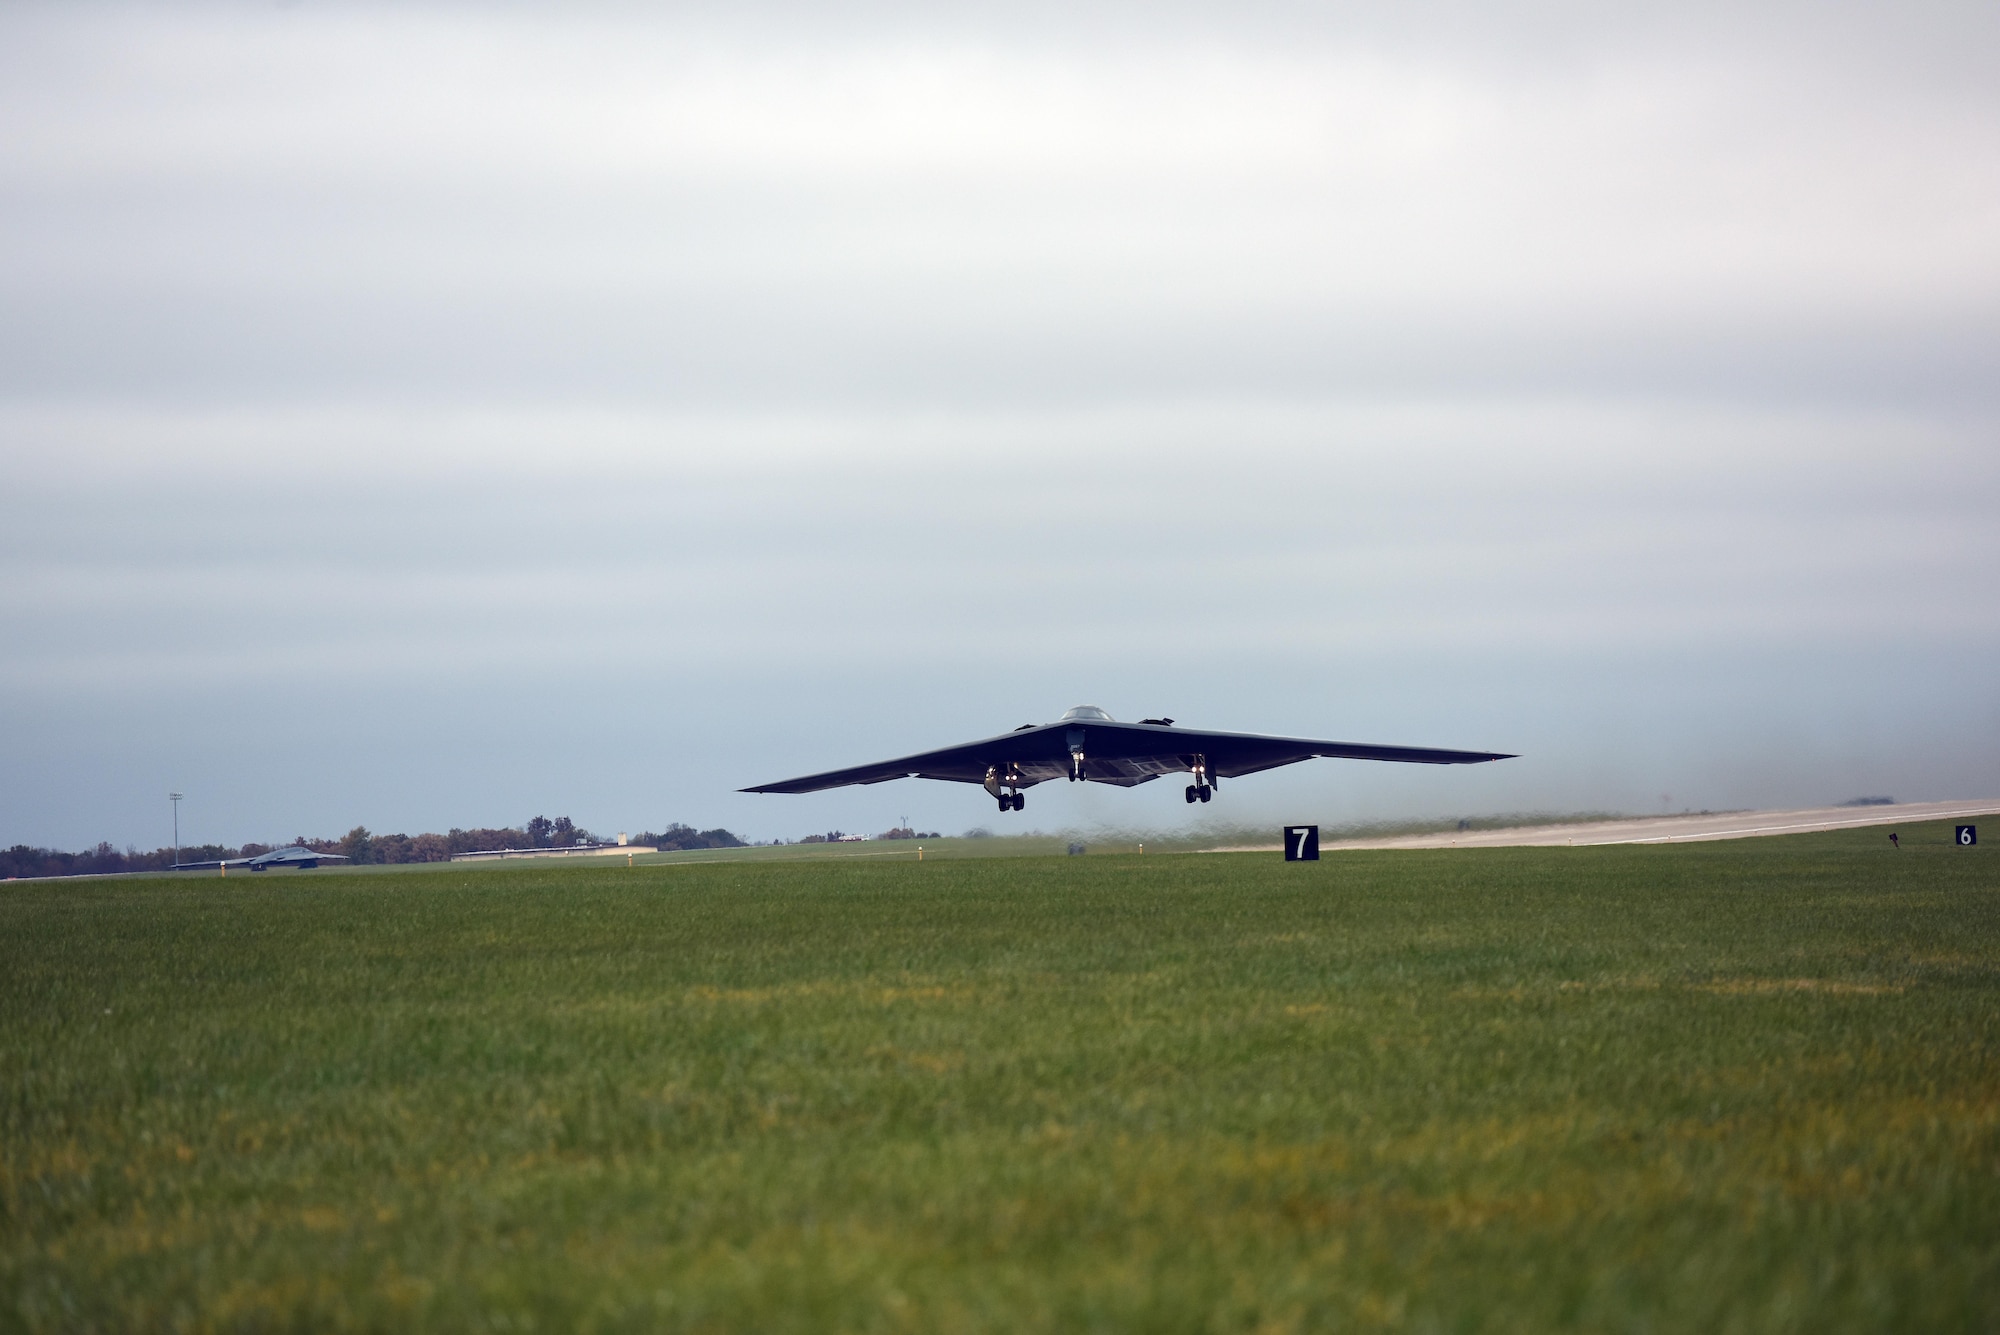 A U.S. Air Force B-2 Spirit takes off from Whiteman Air Force Base, Mo., Nov. 4, 2017, during exercise Global Thunder 2018.